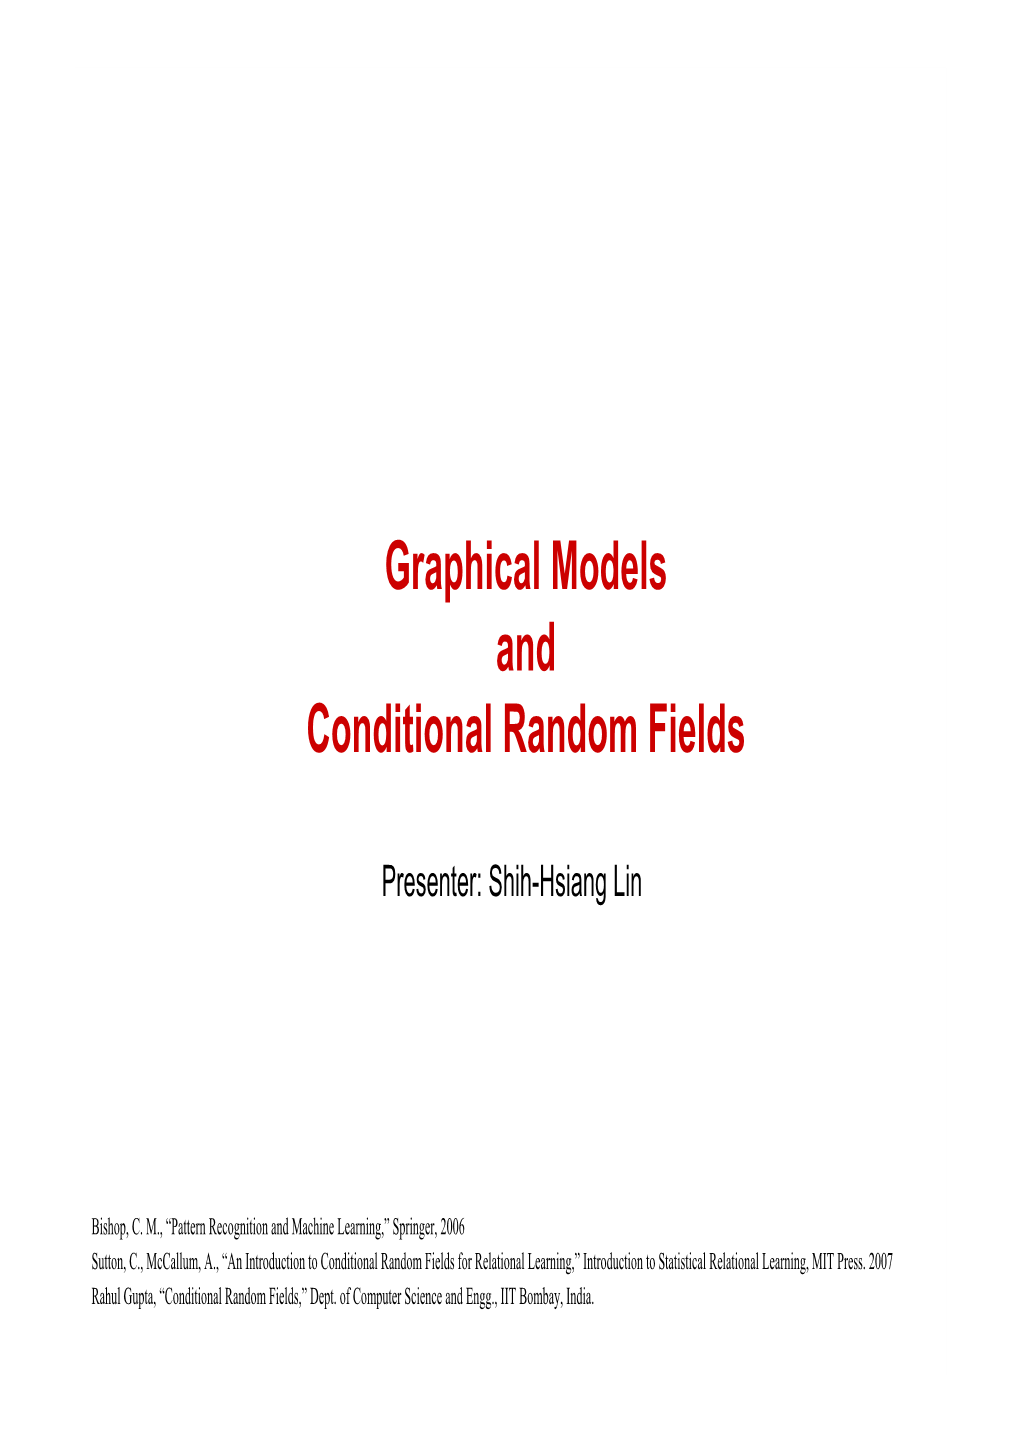 Graphical Models and Conditional Random Fields